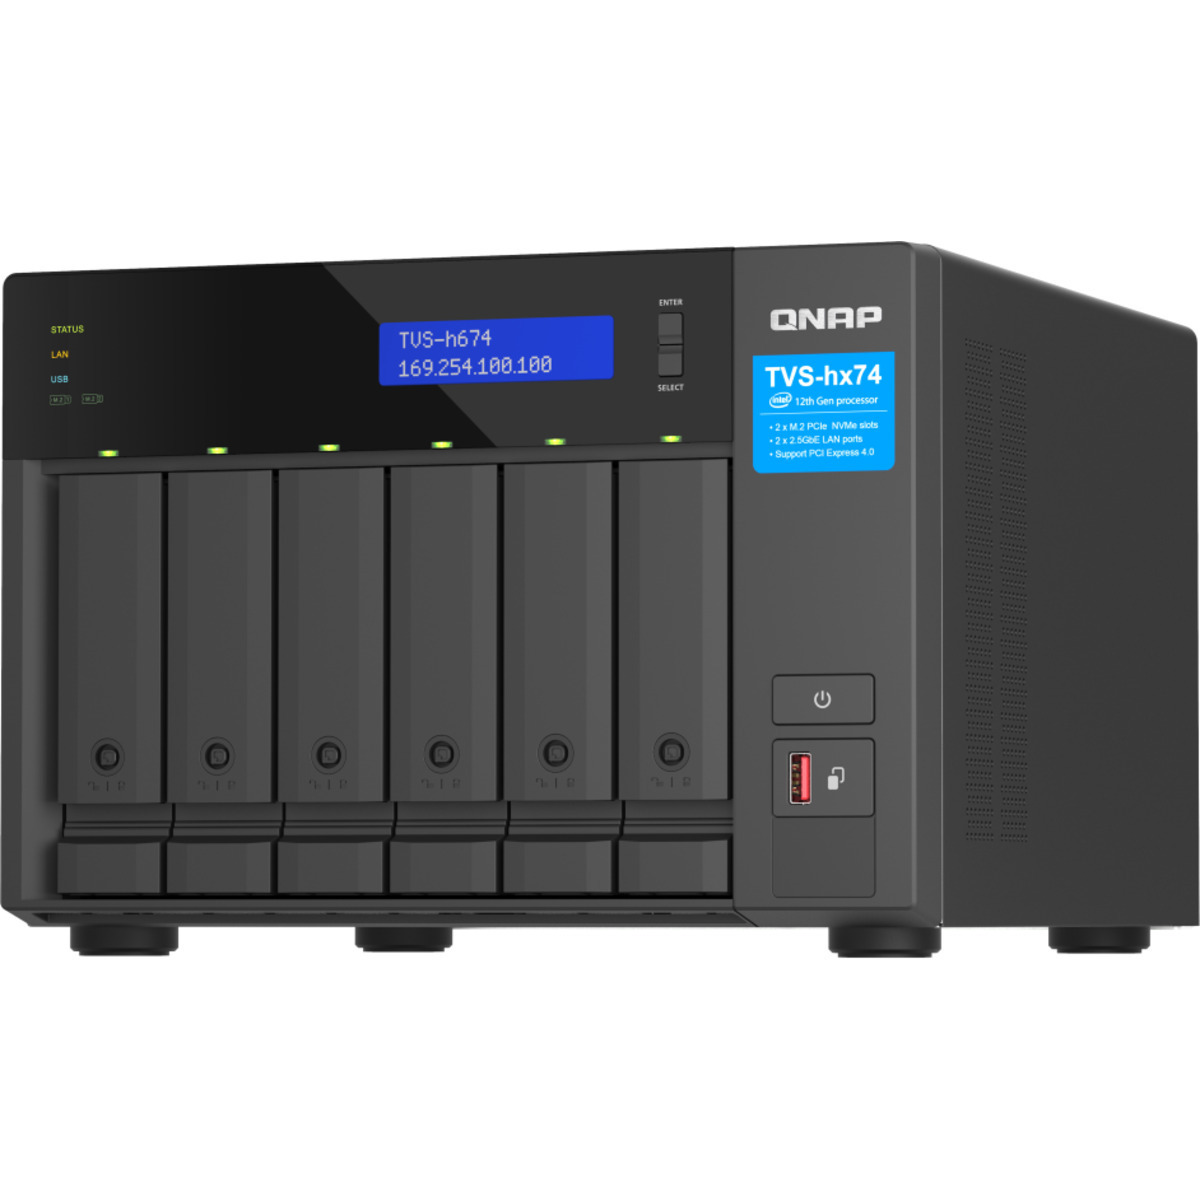 QNAP TVS-h674 Core i3 60tb 6-Bay Desktop Multimedia / Power User / Business NAS - Network Attached Storage Device 5x12tb Seagate IronWolf Pro ST12000NT001 3.5 7200rpm SATA 6Gb/s HDD NAS Class Drives Installed - Burn-In Tested - ON SALE TVS-h674 Core i3